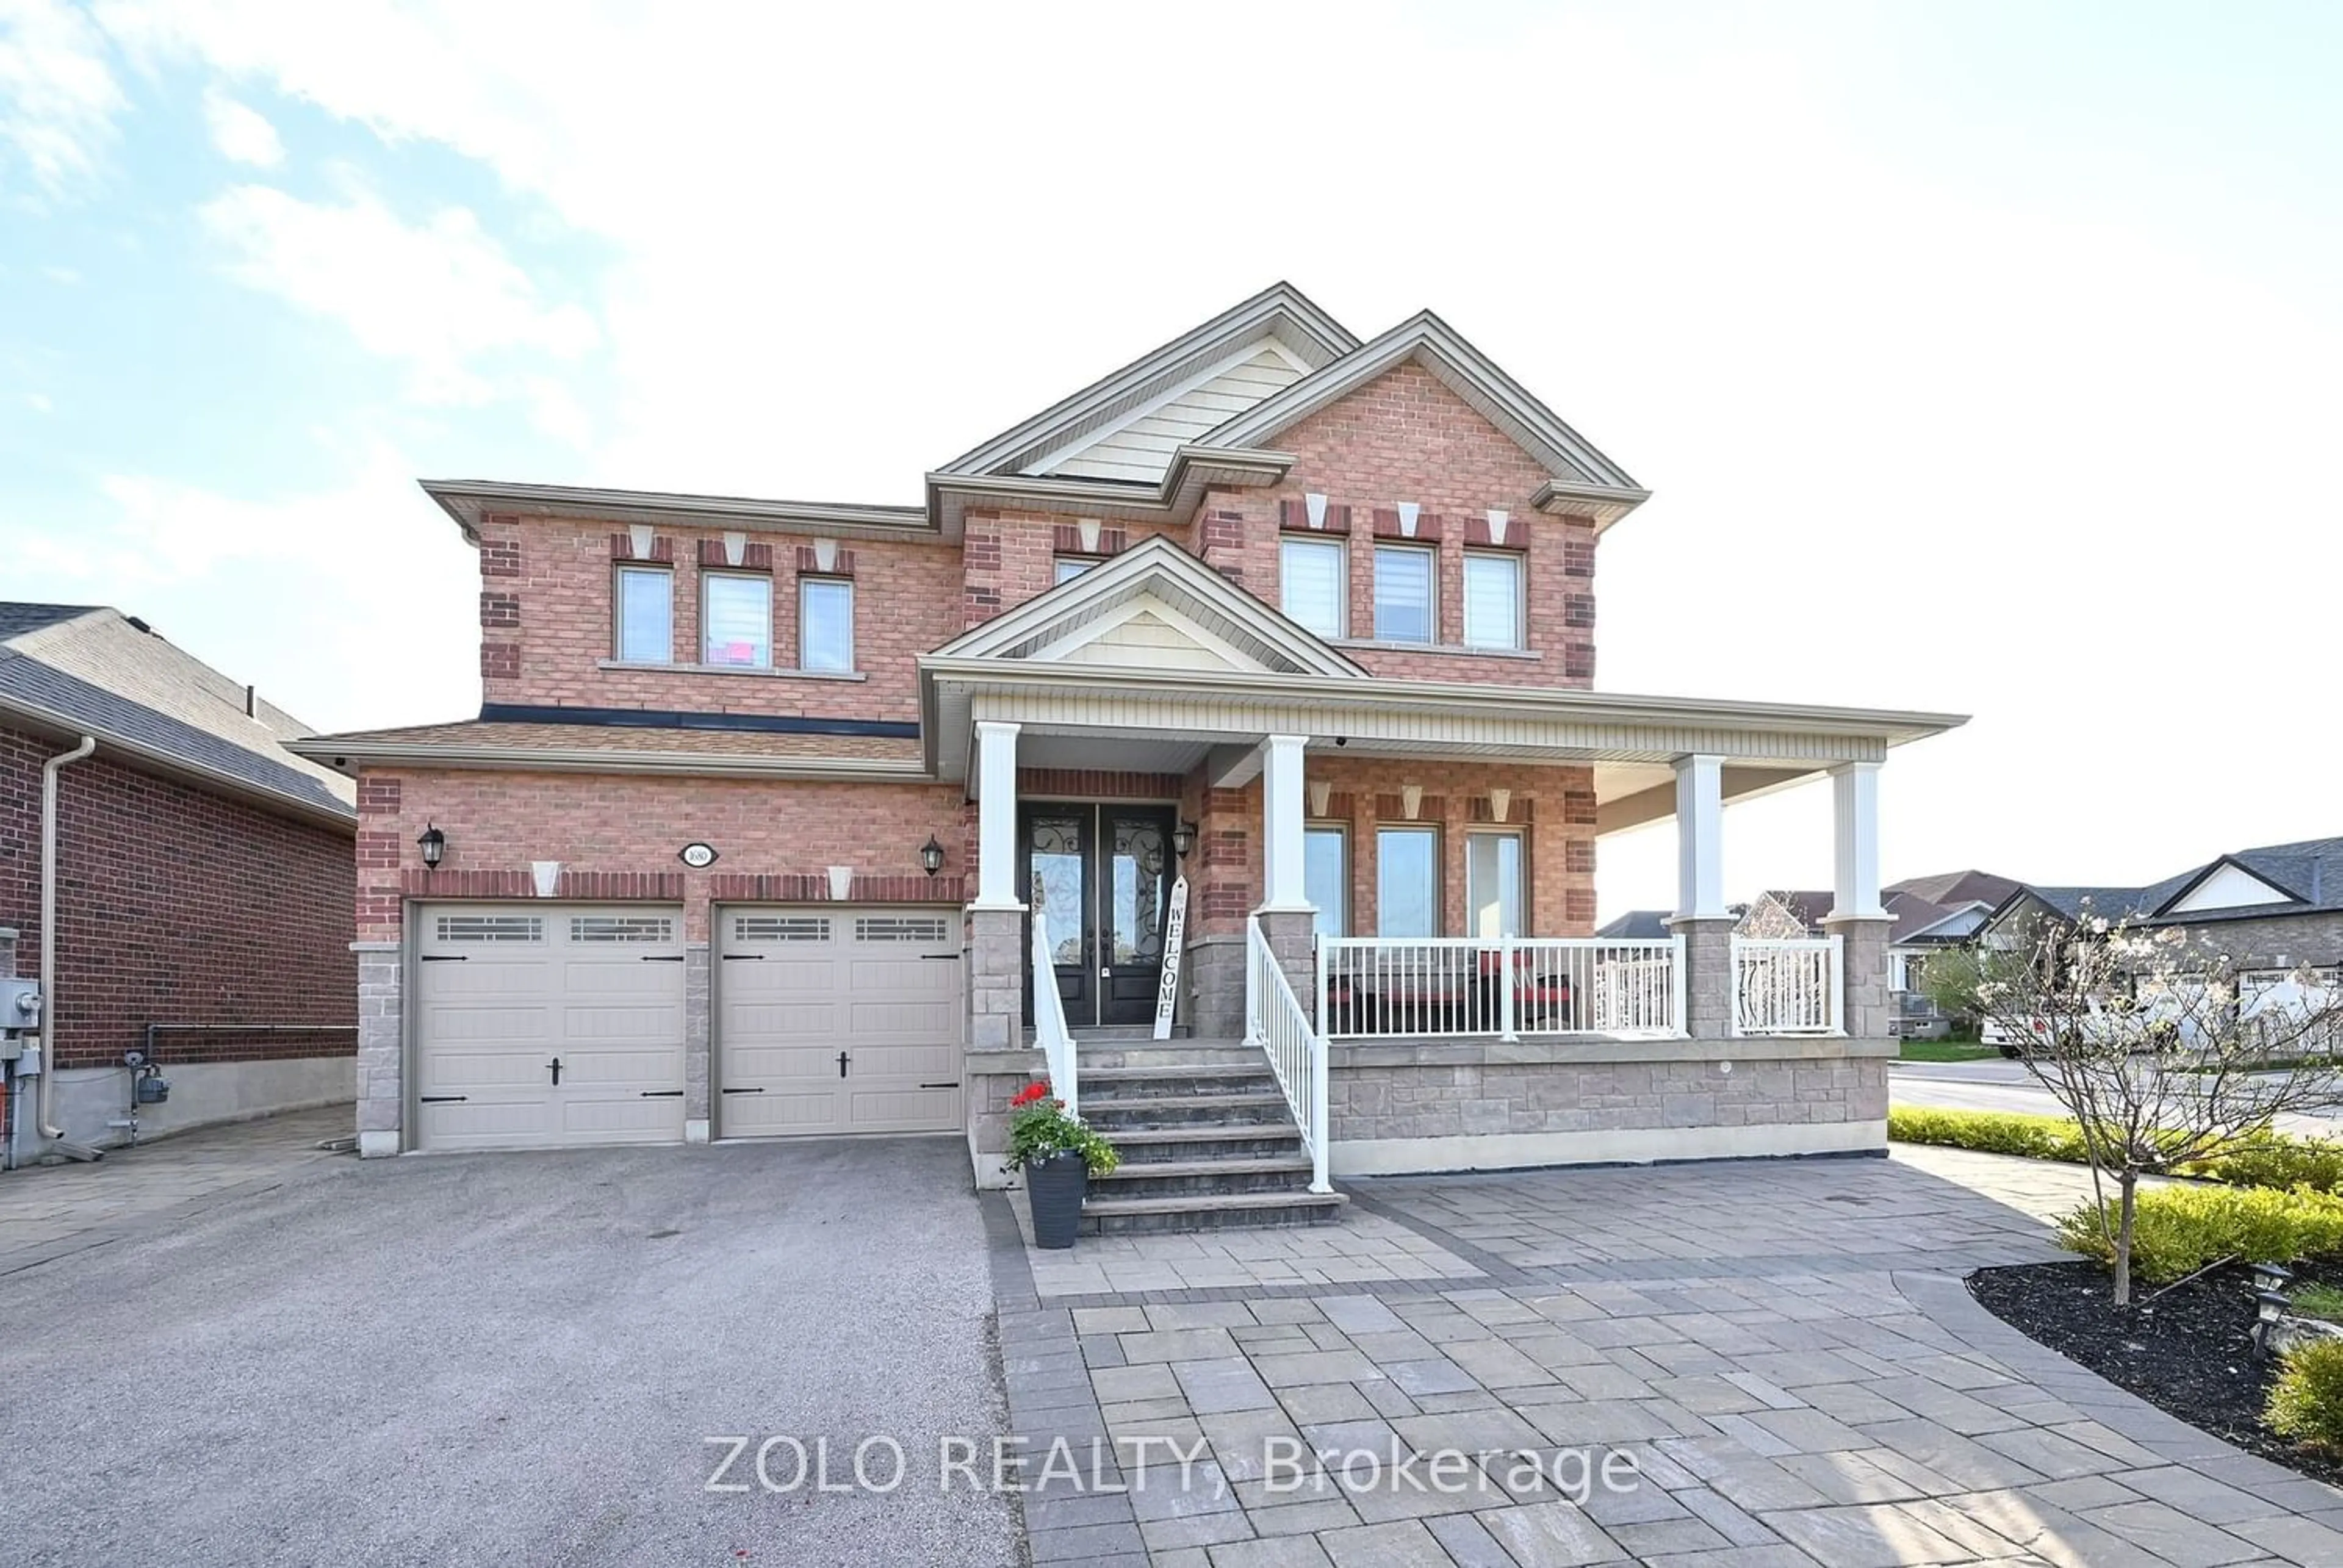 Home with brick exterior material for 1680 Angus St, Innisfil Ontario L9S 0L1